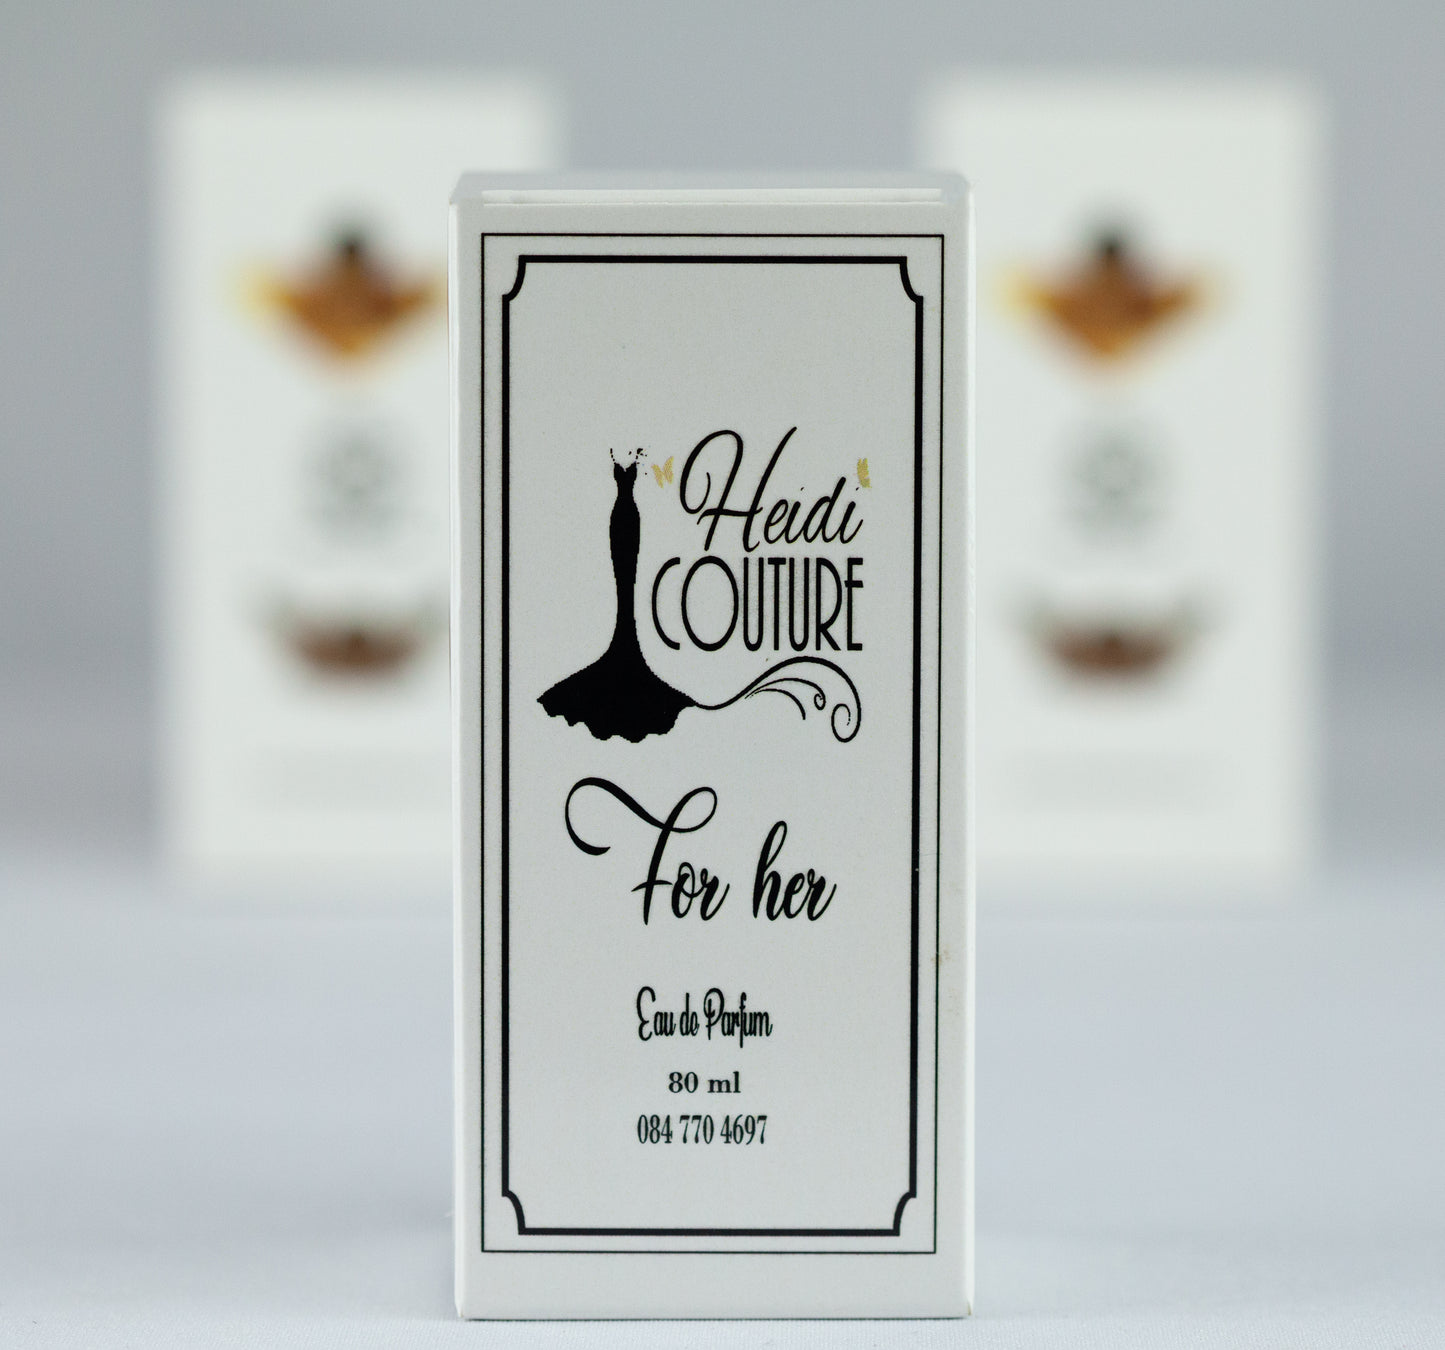 Heidi Couture No. 2 Perfume for Her